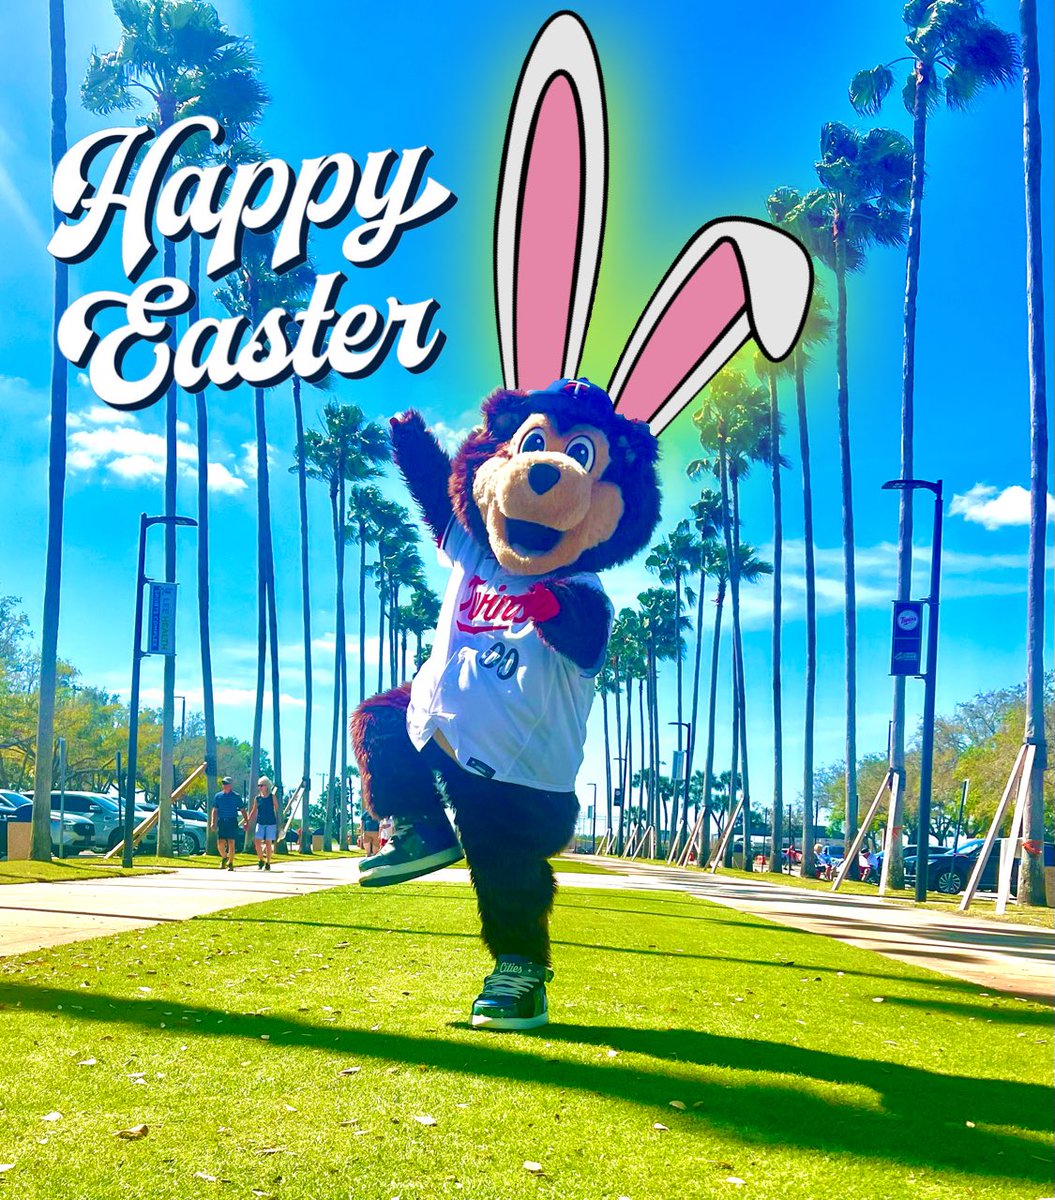 Tried to be bunny! But instead, I decided to keep it simple and do the bear minimum. HAPPY EASTER! 🐰 #MLB #HappyEaster